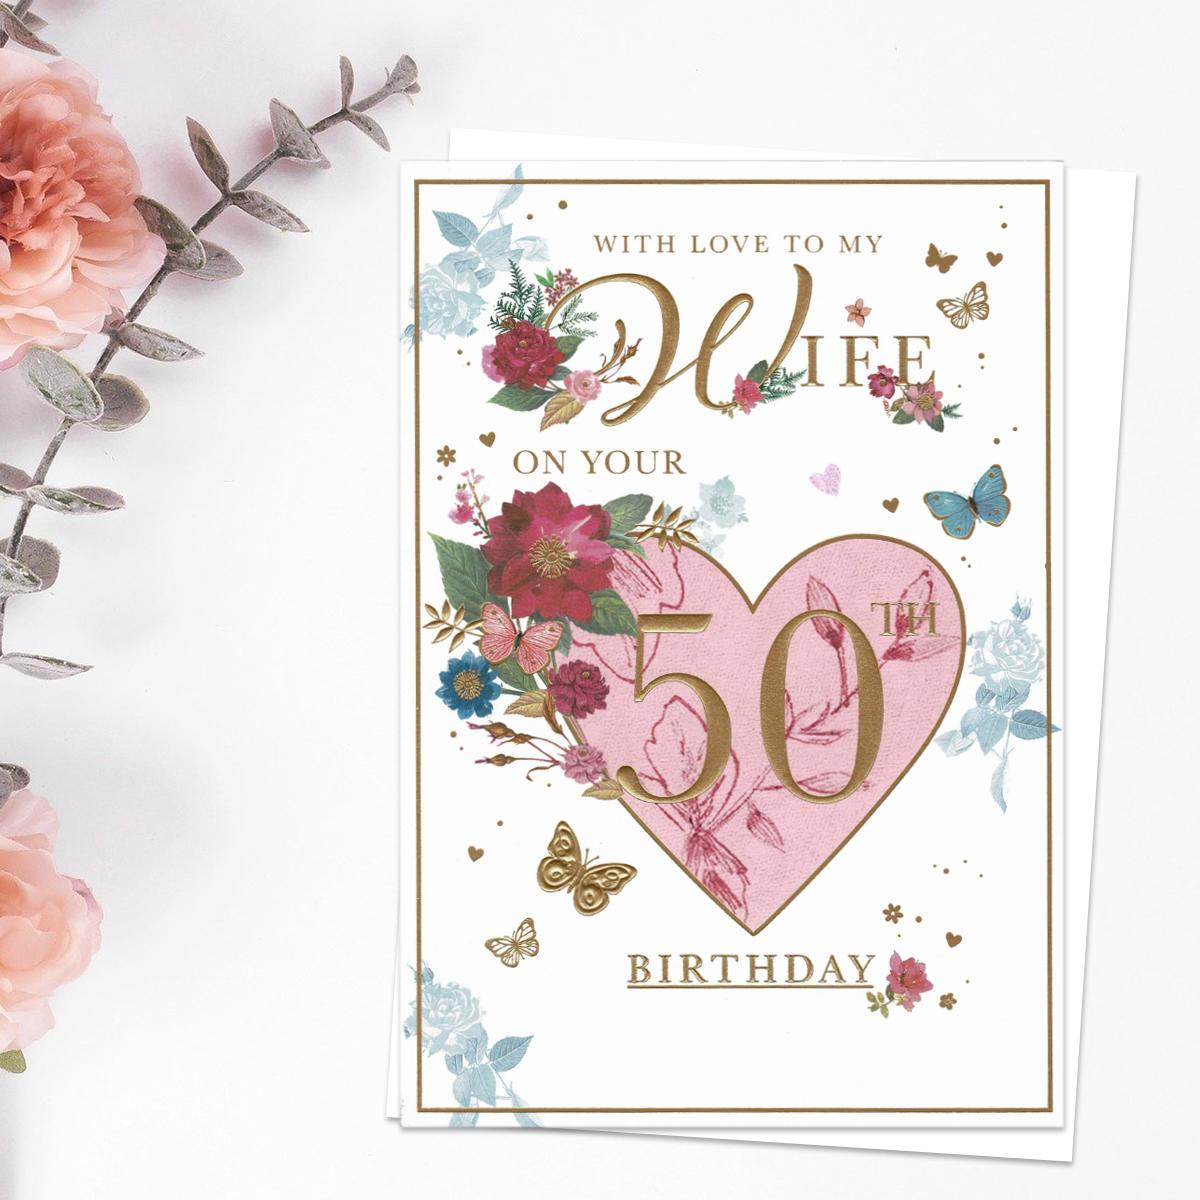 Wife On Your 50th Birthday Floral Heart Card Front Image